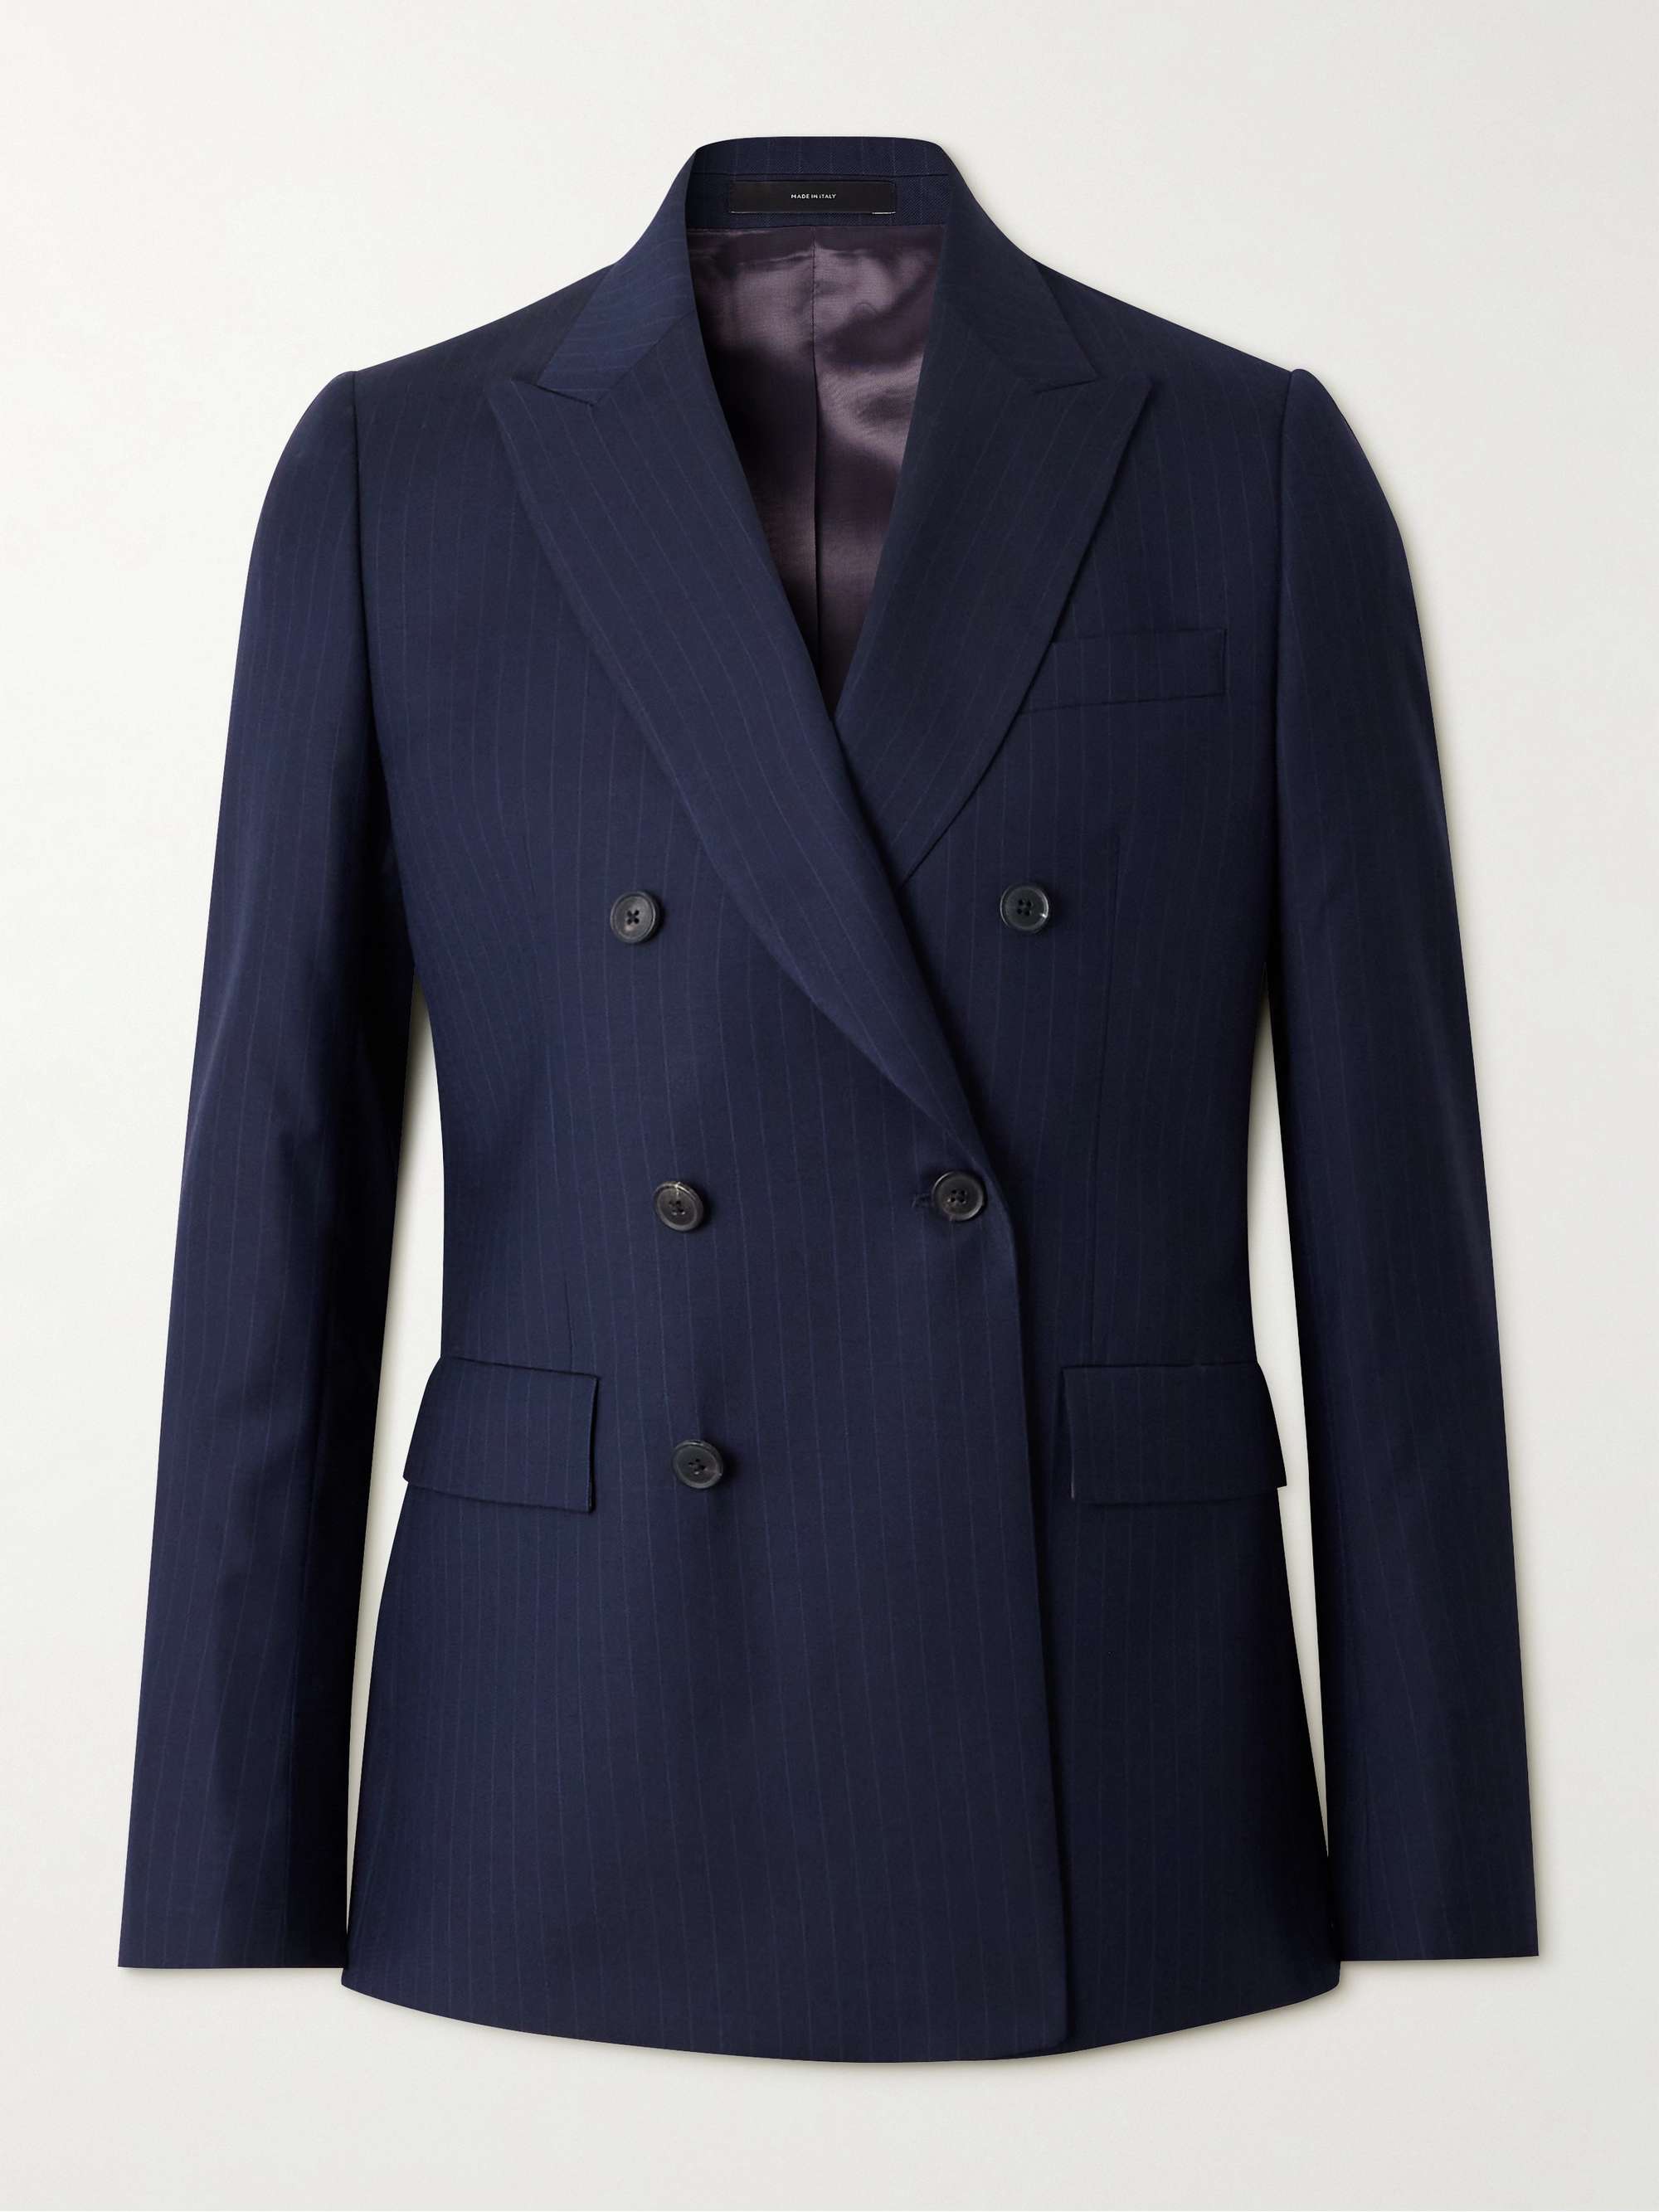 Men's Classic Suits - Traditional Single & Double Breasted Italian